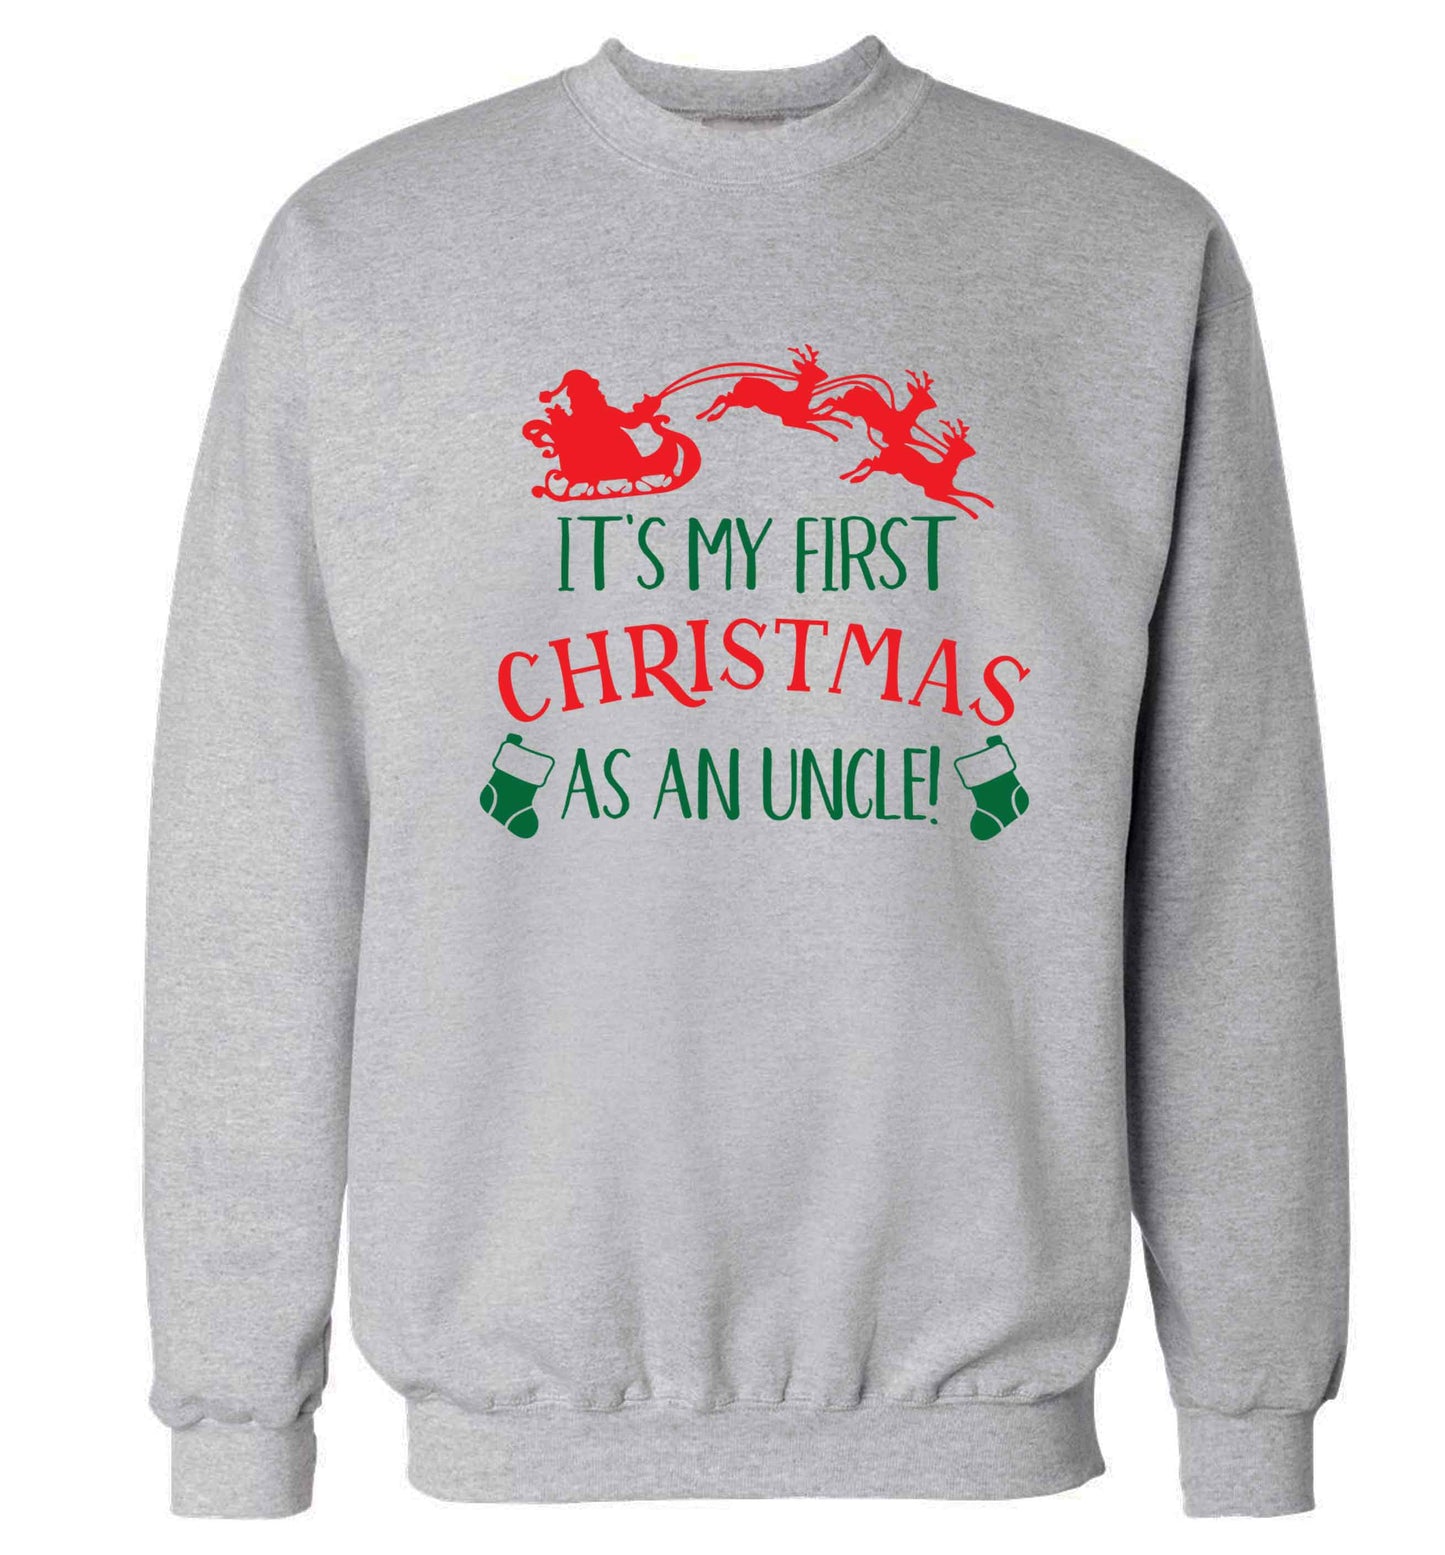 It's my first Christmas as an uncle! Adult's unisex grey Sweater 2XL